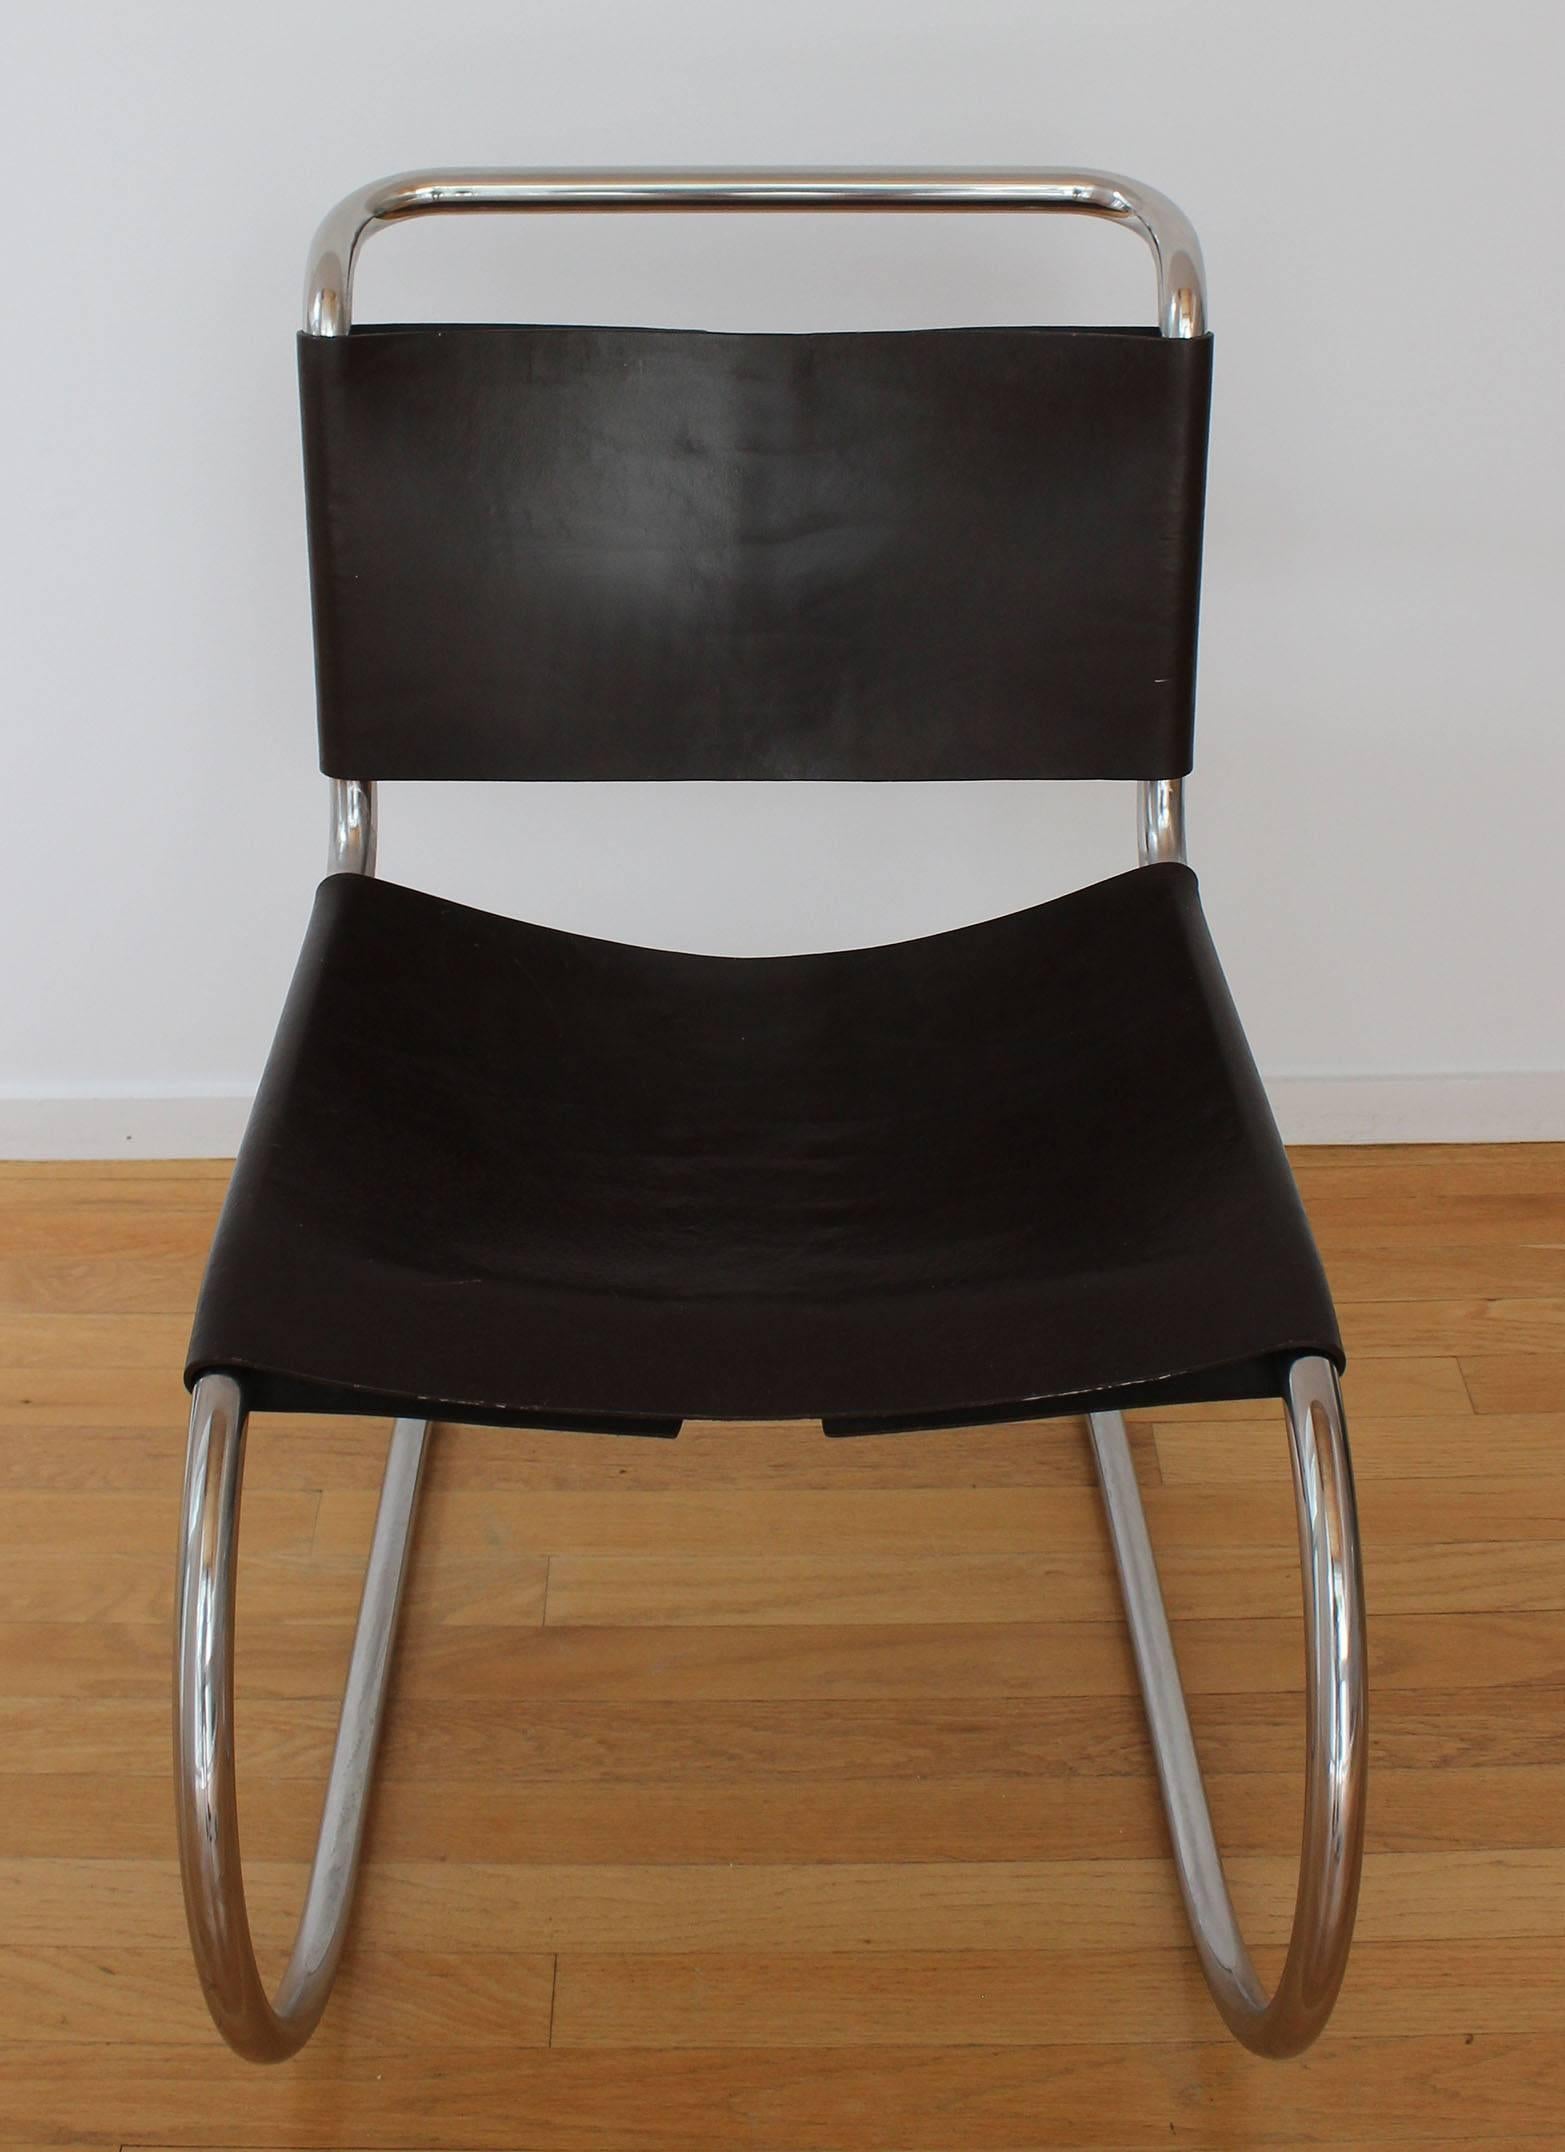 Classic set of tubular chrome MR chairs, originally designed, 1927 by Ludwig Mies van der Rohe in vintage original dark brown leather.

Original owner bought from Knoll, 1973.

Complimentary delivery within 30 miles.